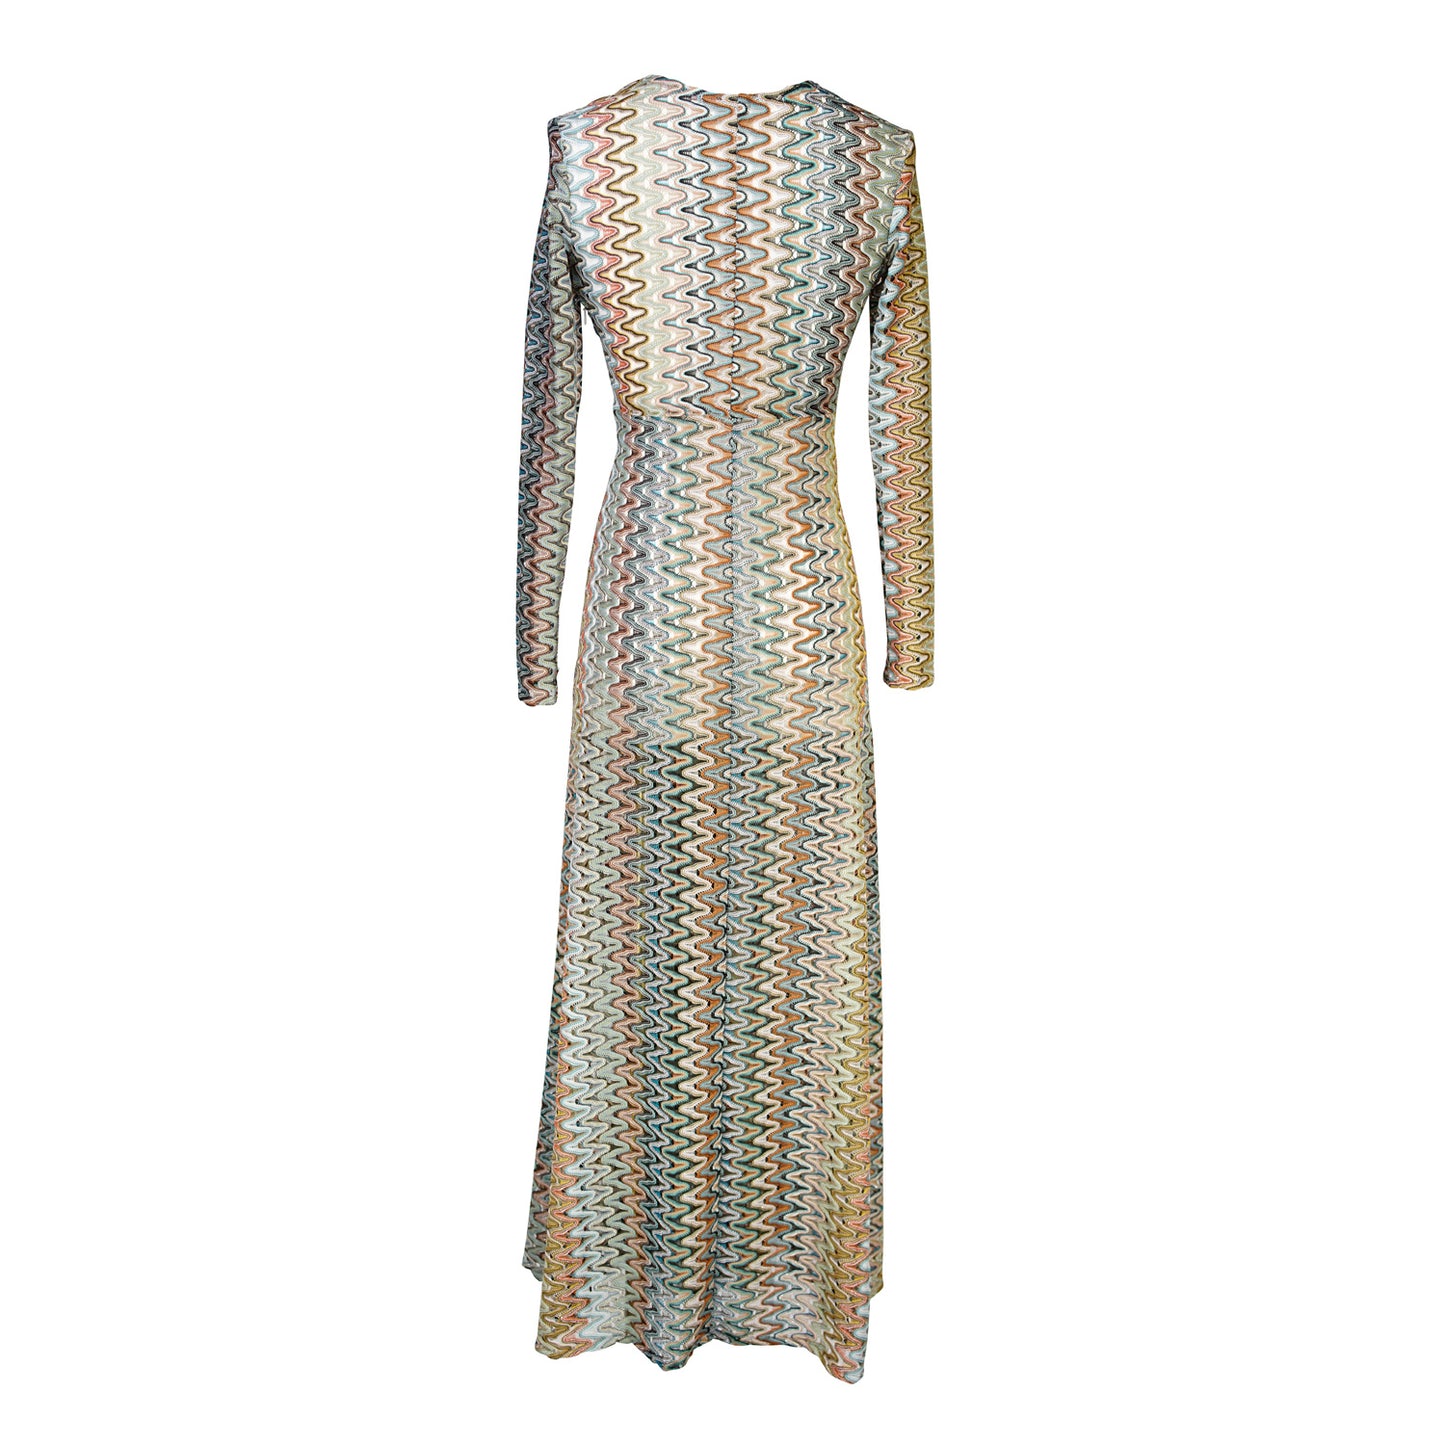 Jennafer Grace Vittoria Knot Dress Missoni-inspired metallic-infused knit 70s multicolor color palette long sleeve maxi dress knot waist detail invisible zipper handmade in California USA